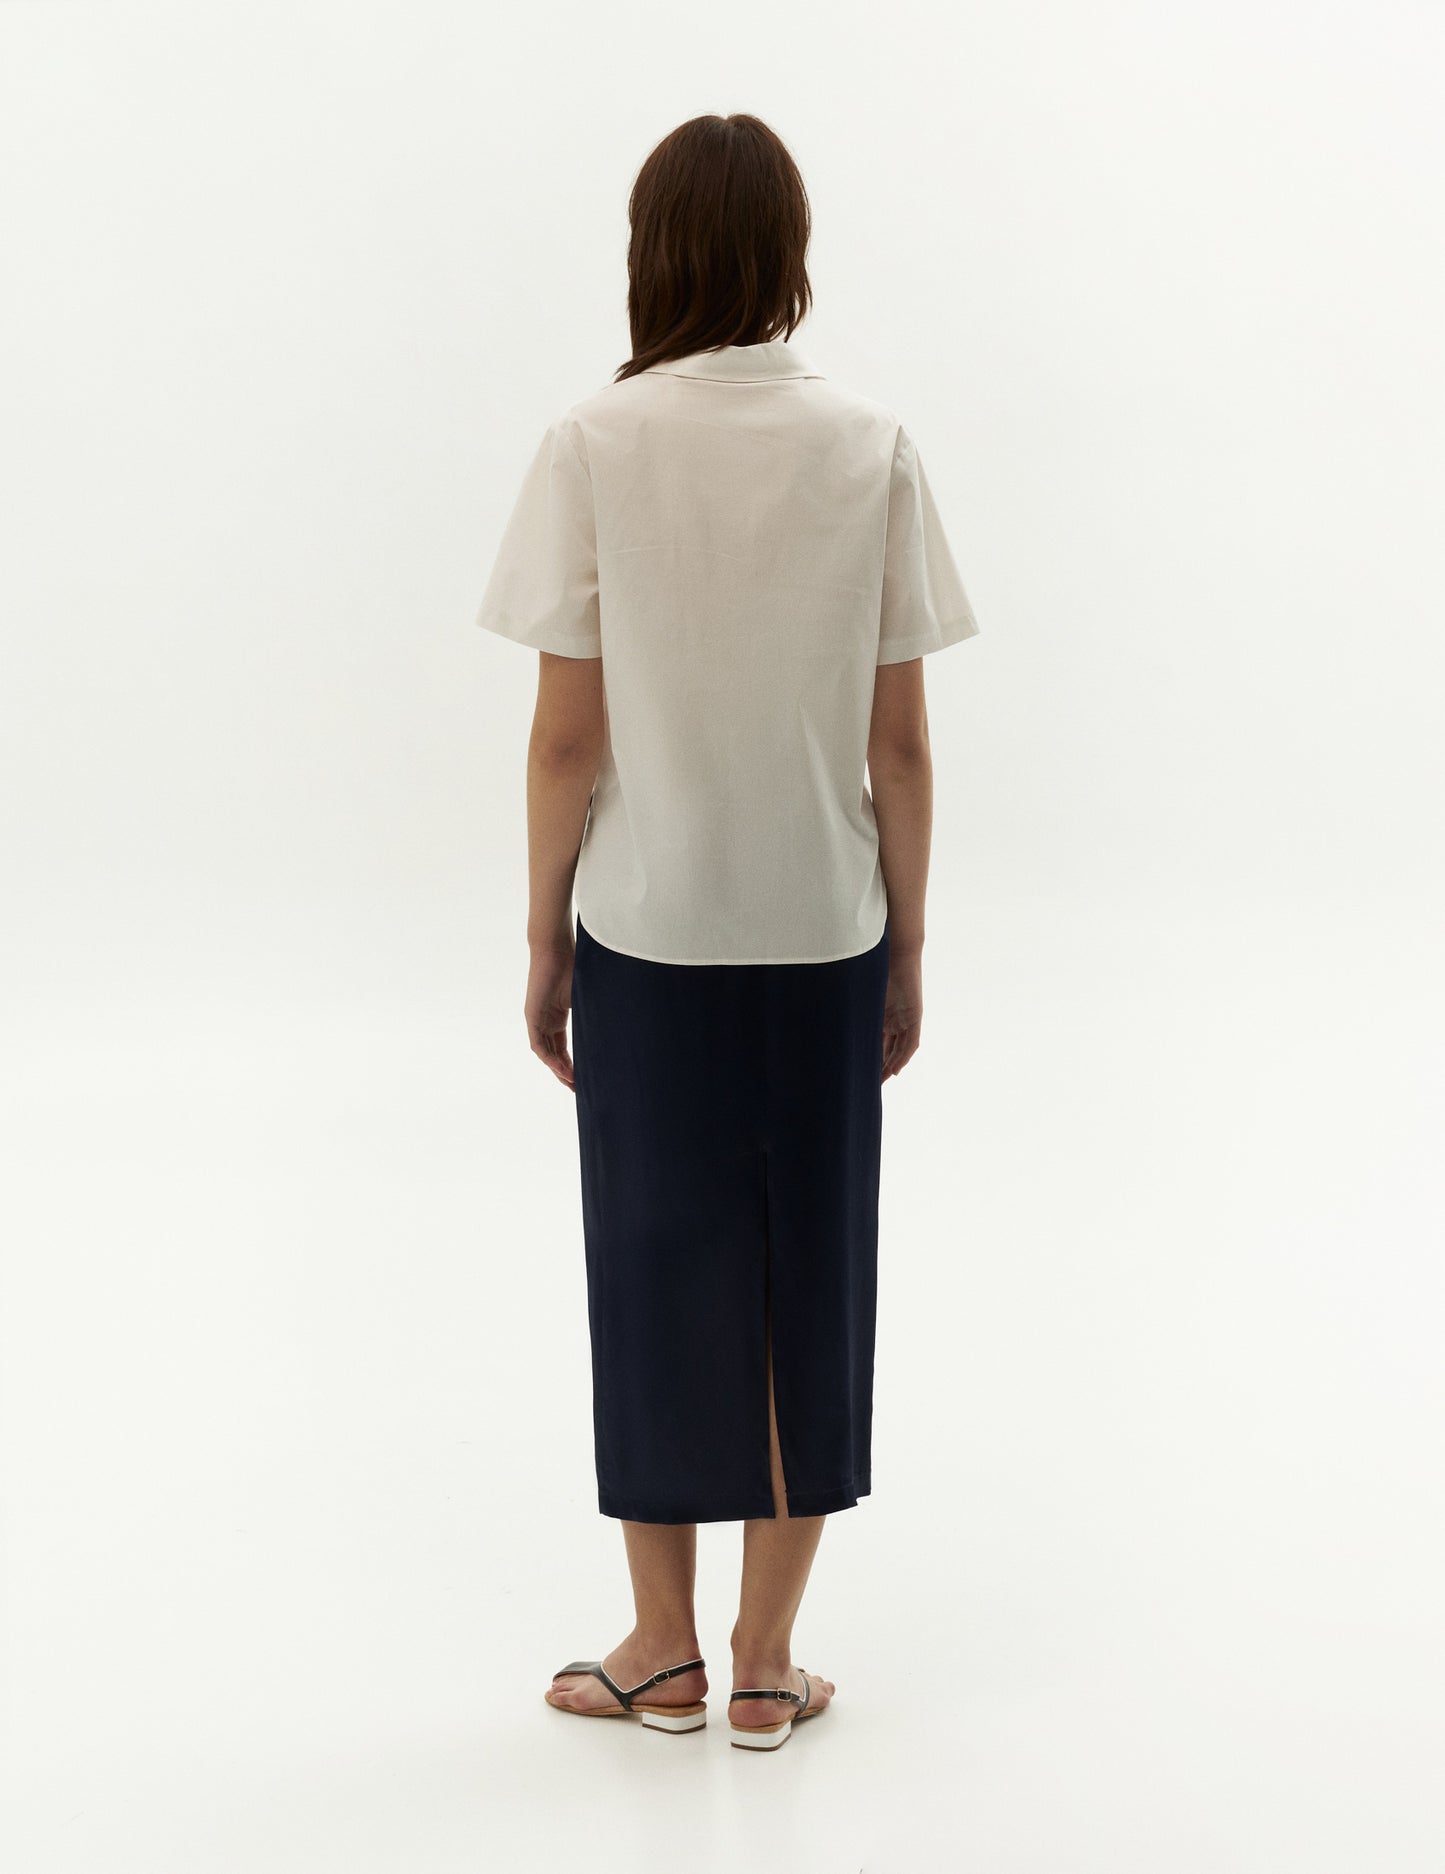 Navy long skirt with back slit. ForMA clothing brand online shop